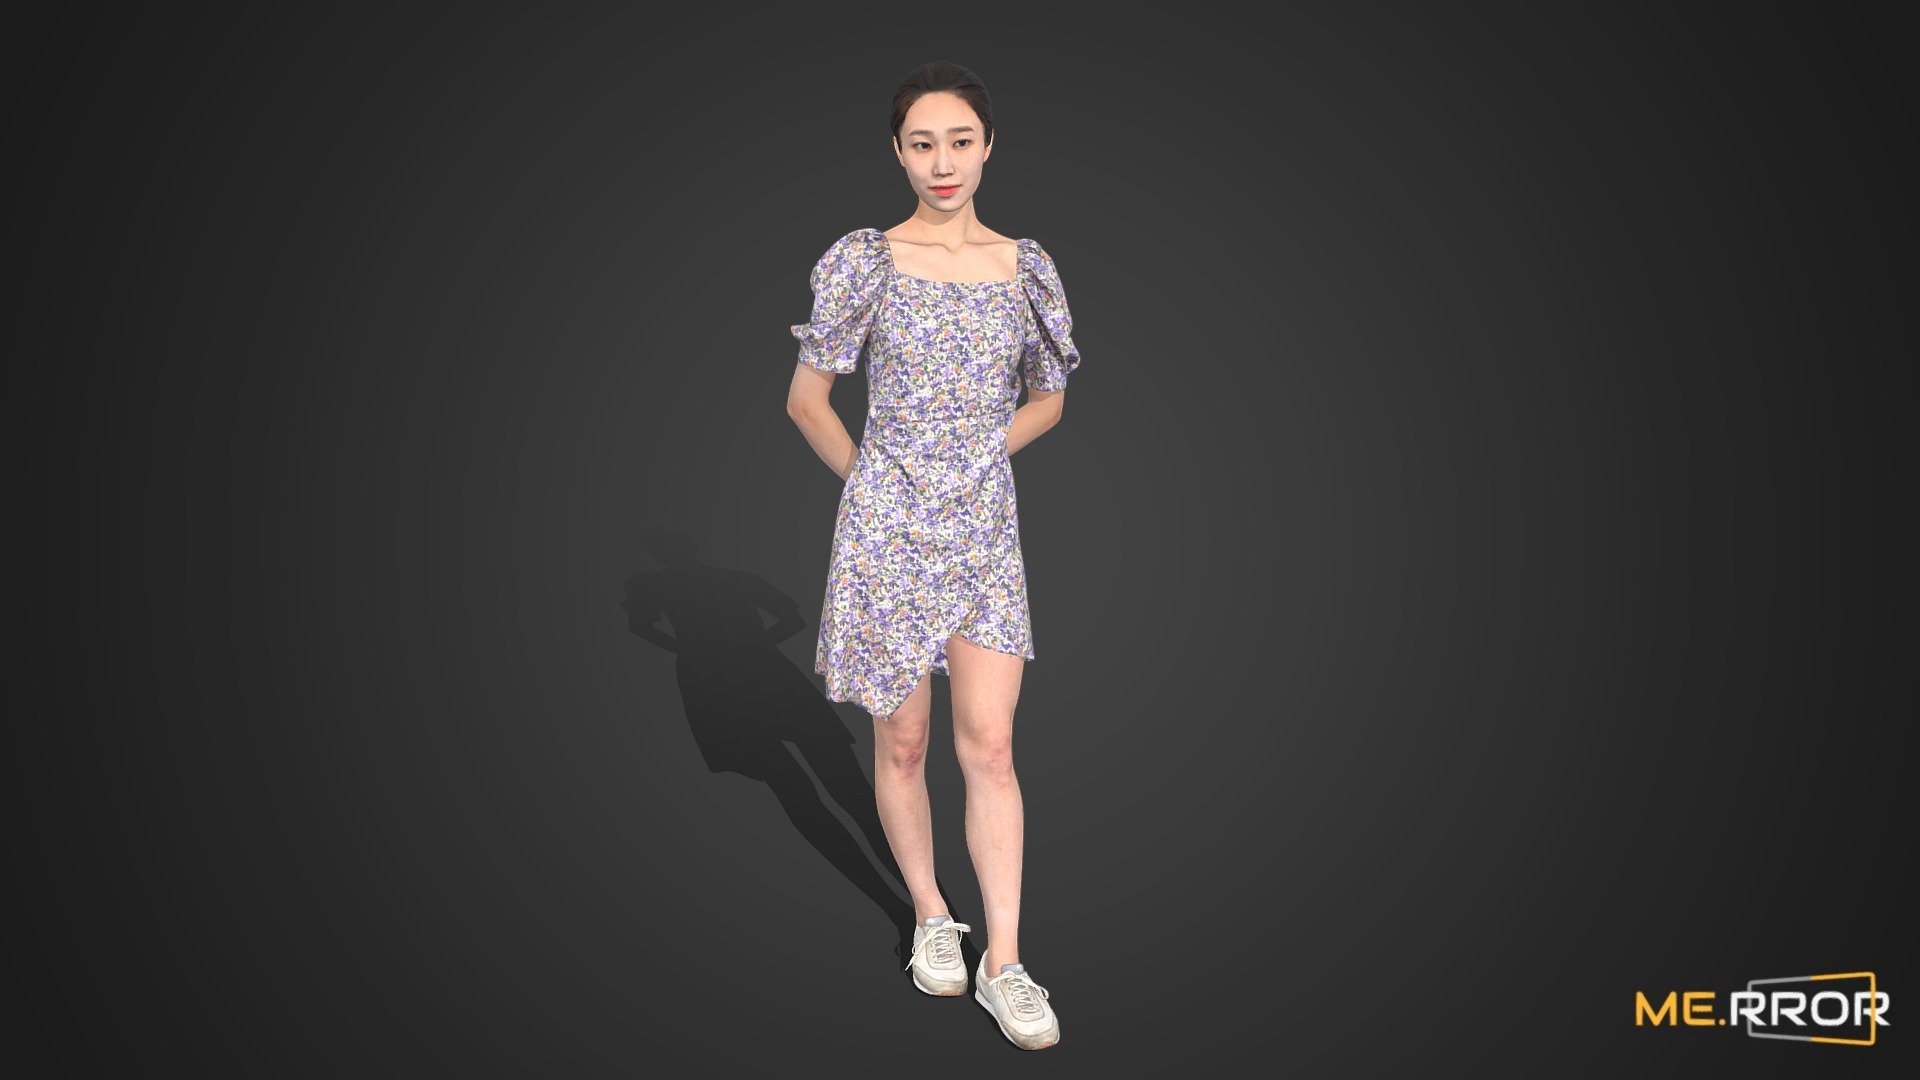 ME.RROR


From 3D models of Asian individuals to a fresh selection of free assets available each month - explore a richer diversity of photorealistic 3D assets at the ME.RROR asset store!

https://me-rror.com/store




[Model Info]




Model Formats : FBX, MAX

Texture Maps (8K) : Diffuse, Normal

You can buy this model at https://me-rror.com/asset/human/asset622




Find Scanned - 2M poly version here: https://sketchfab.com/3d-models/b41be69e09244cd6aae3afe141bddcc0

If you encounter any problems using this model, please feel free to contact us. We'd be glad to help you.



[About ME.RROR]

Step into the future with ME.RROR, South Korea's leading 3D specialist. Bespoke creations are not just possible; they are our specialty.

Service areas:




3D scanning

3D modeling

Virtual human creation

Inquiries: https://merror.channel.io/lounge - [Game-Ready] Asian Woman Scan_Posed 9 - Buy Royalty Free 3D model by ME.RROR (@merror) 3d model